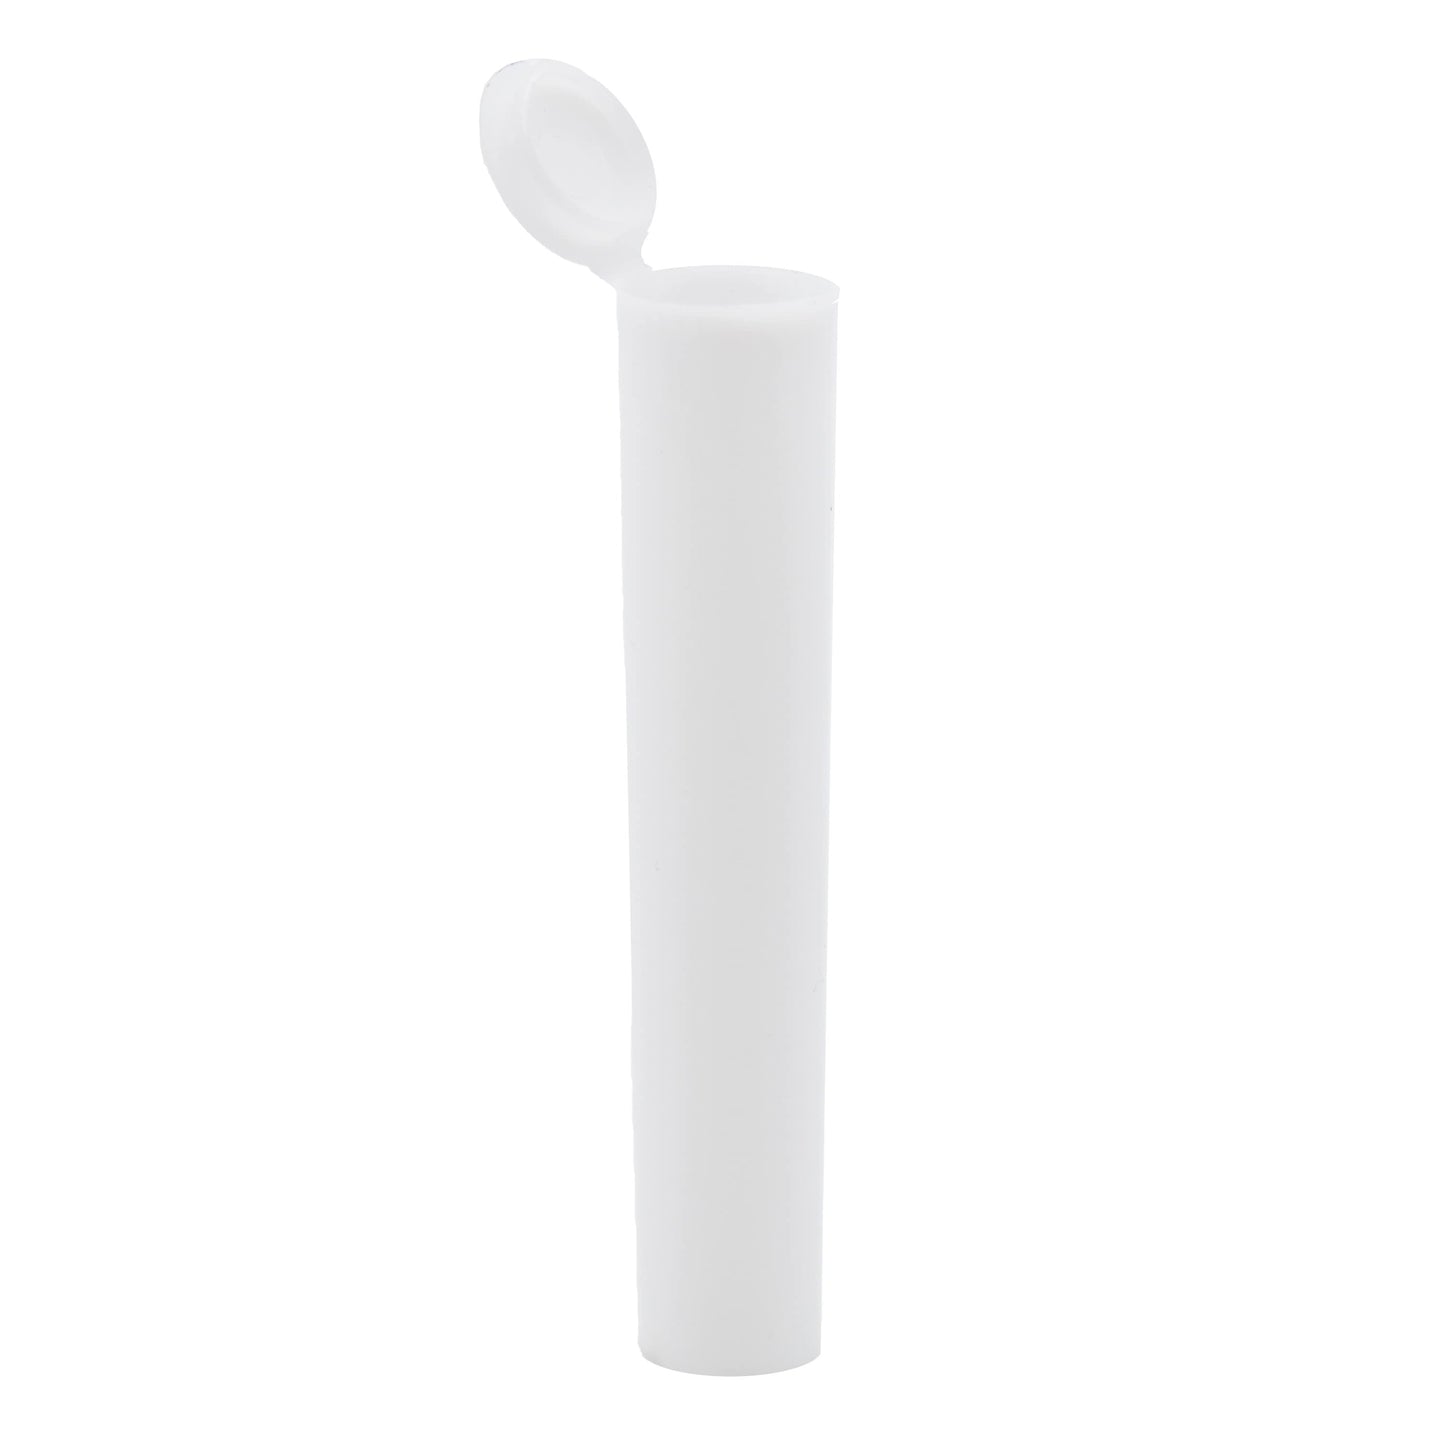 White Brand King Squeeze Pop Top Plastic Tube for Vape Cartridge (85mm)